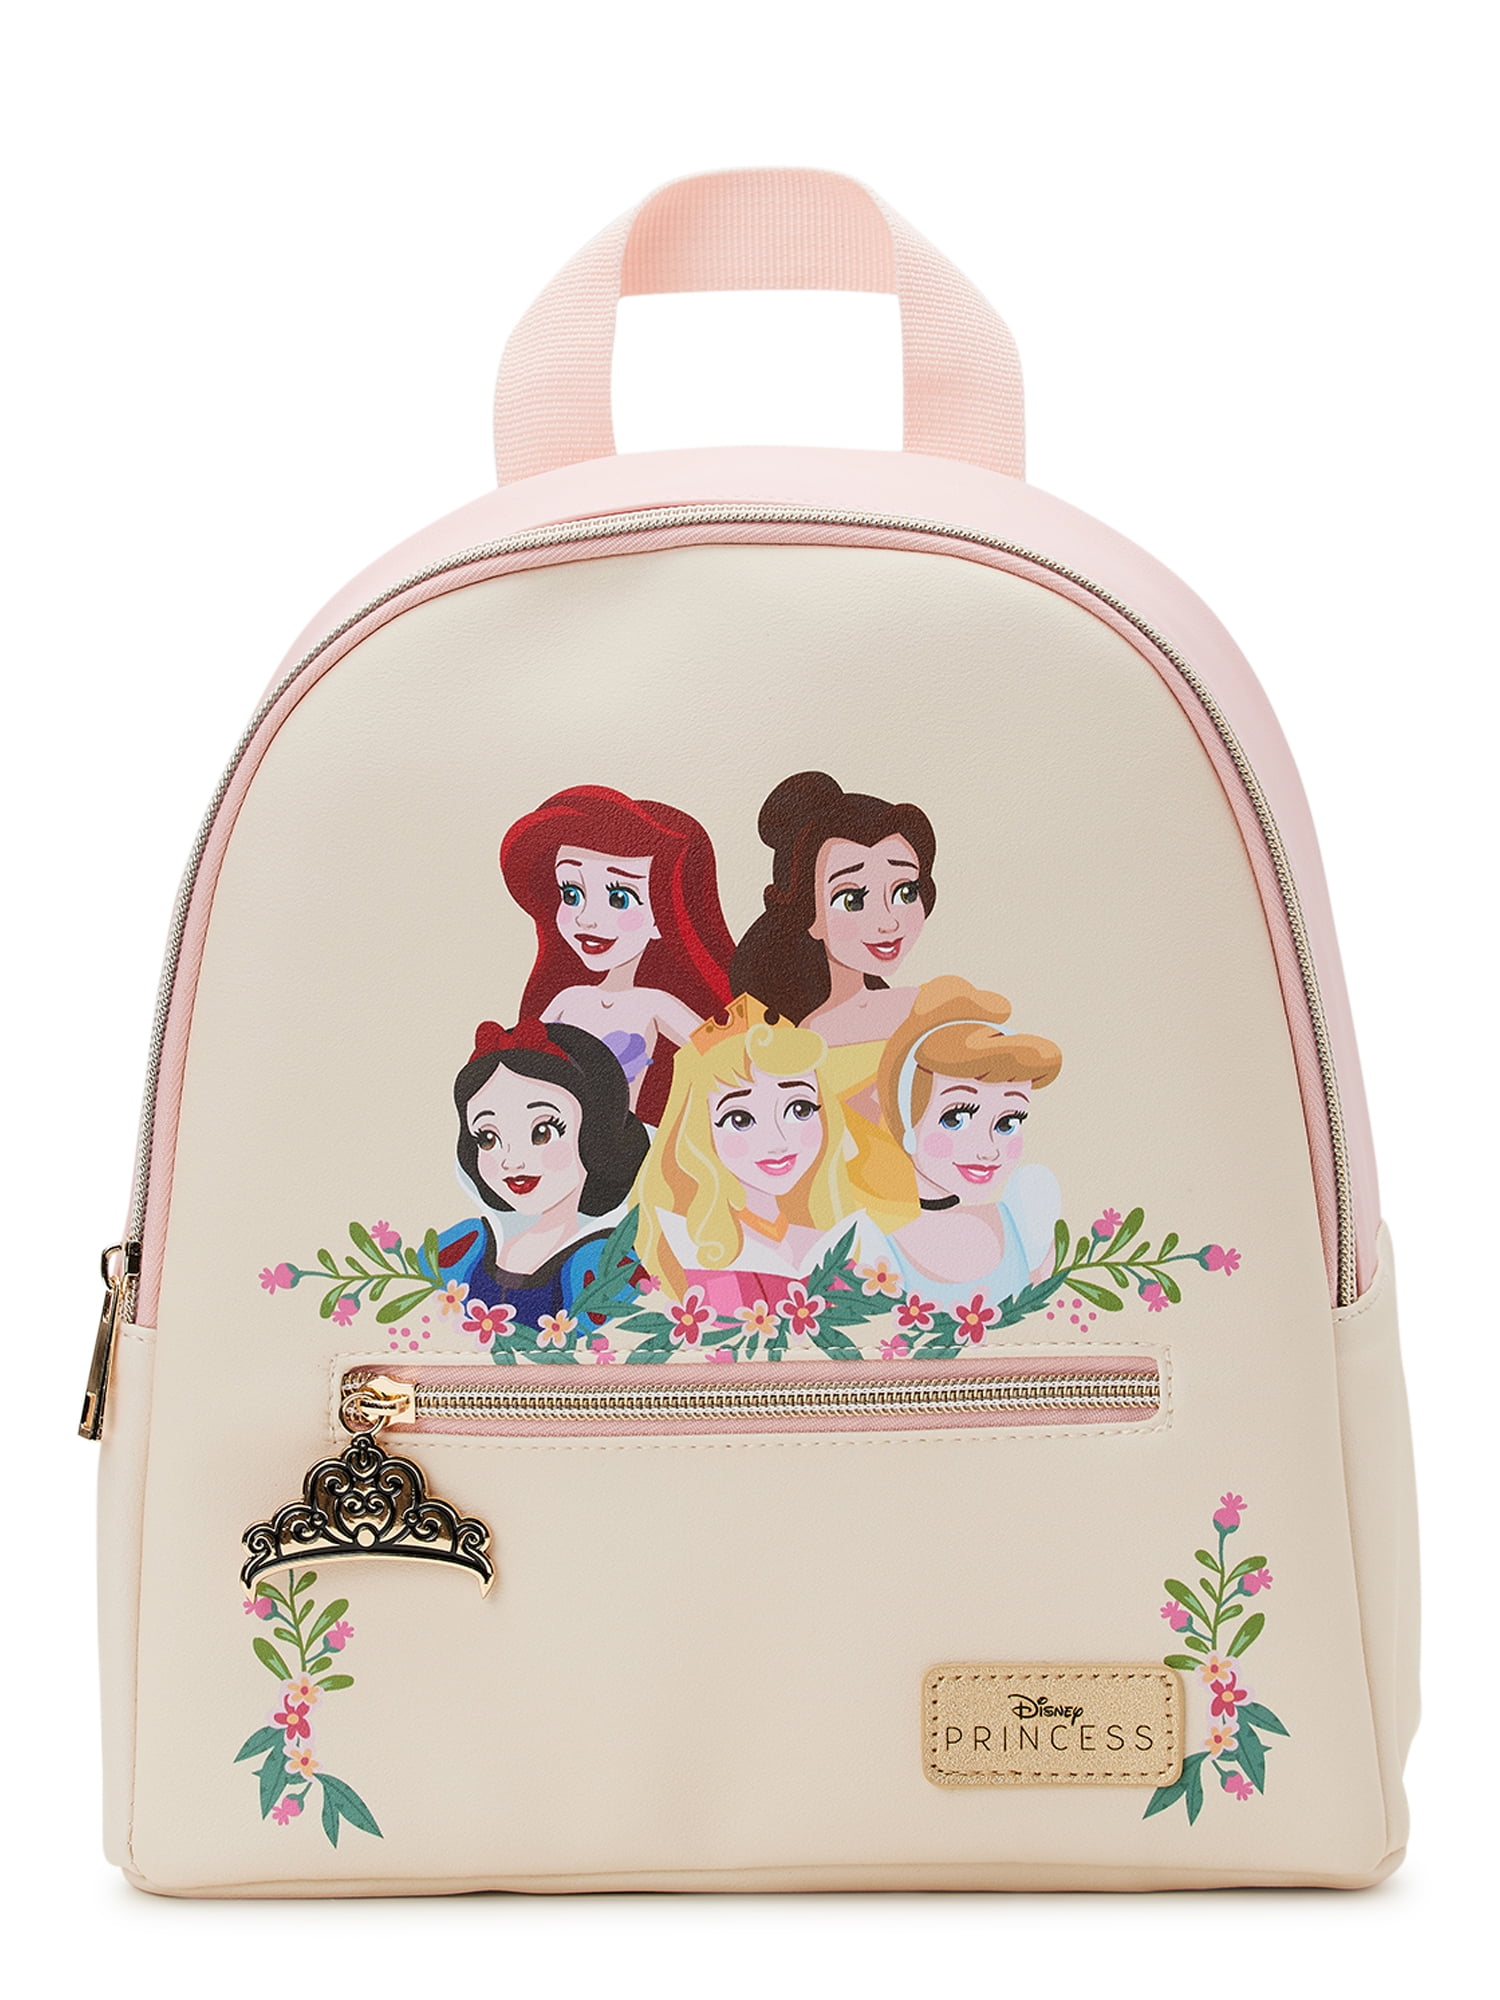 100 Points If You Know All the Characters on Disney's NEW Dooney & Bourke  Bags - AllEars.Net